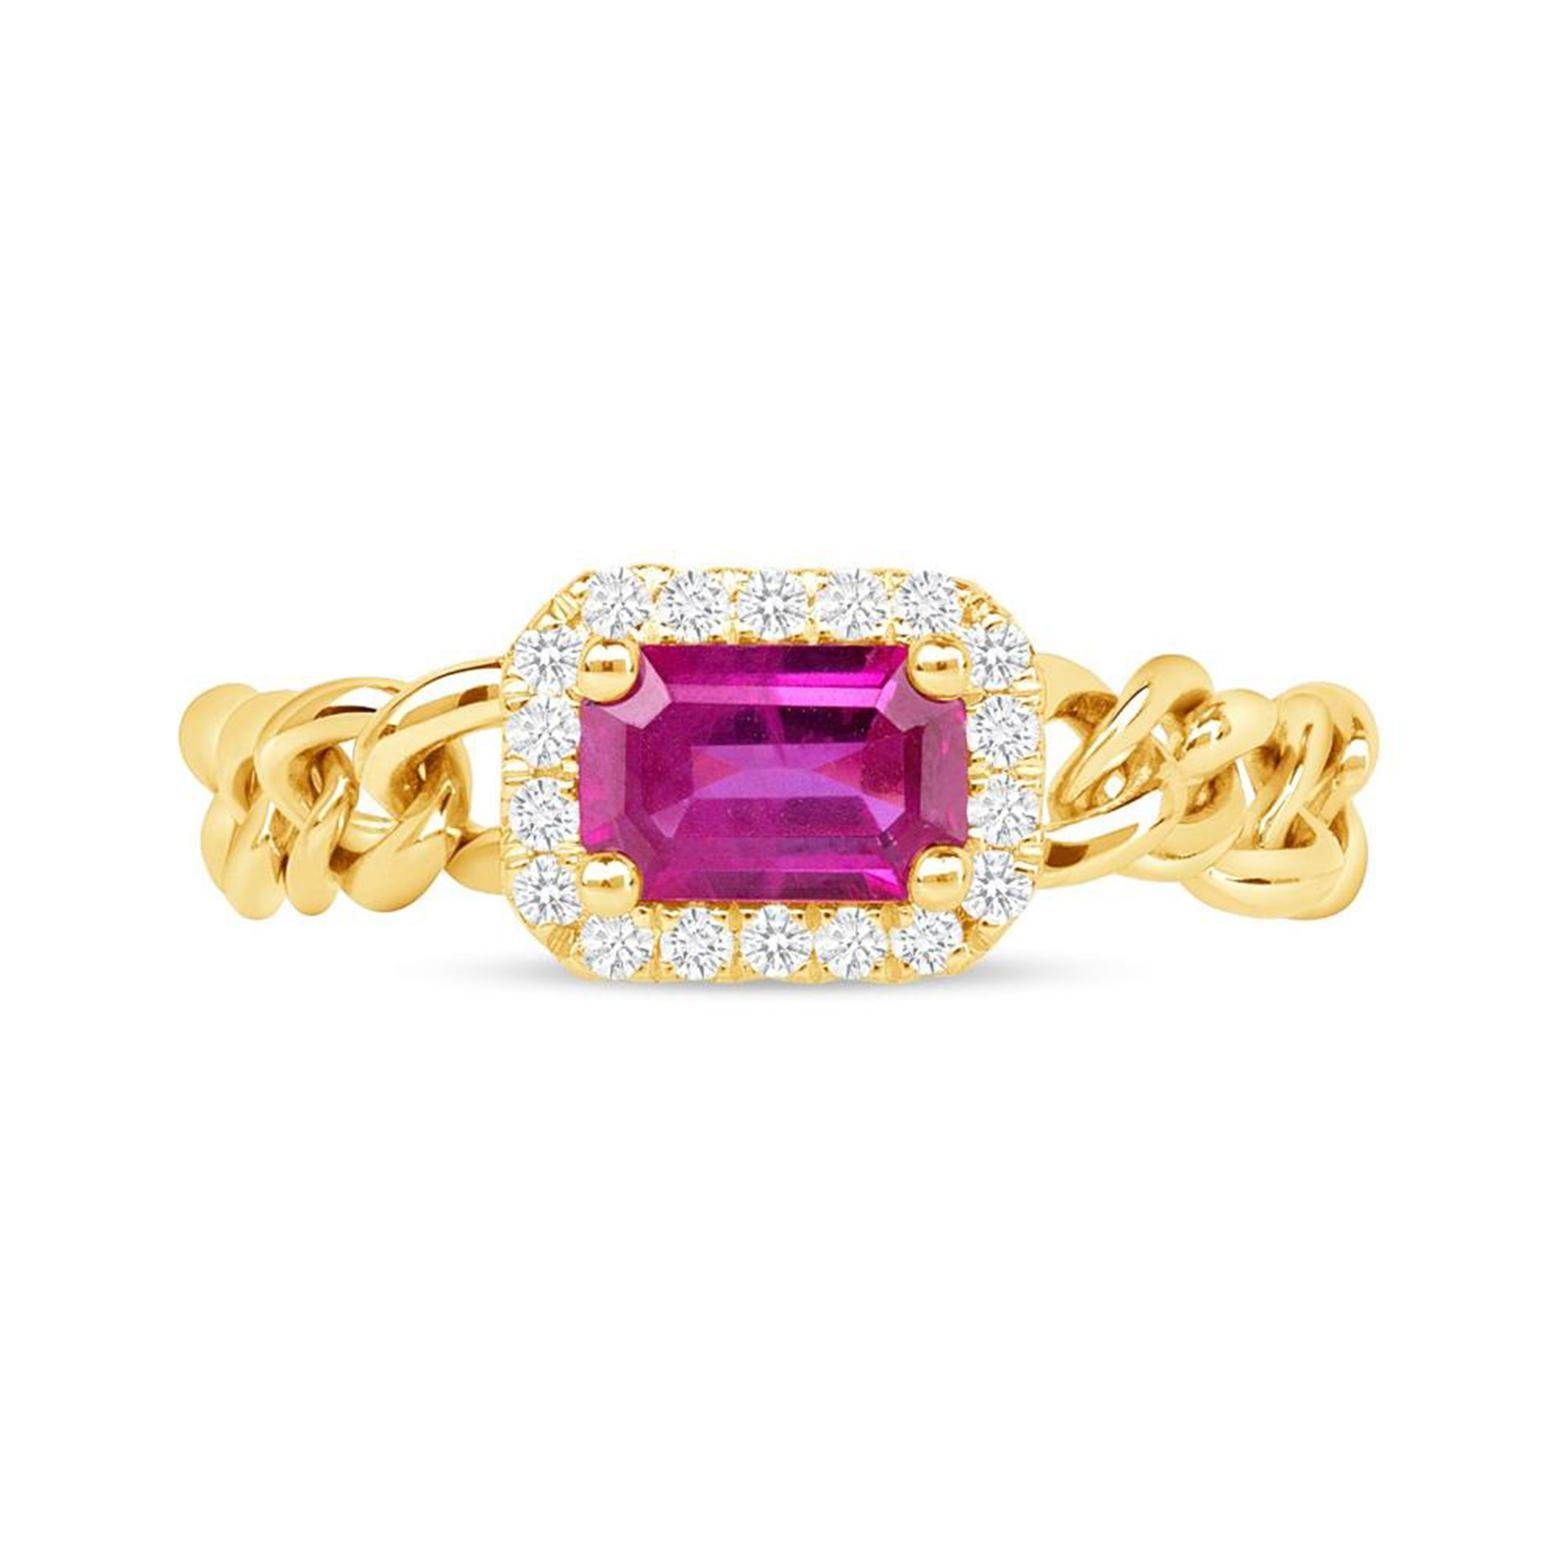 100% Authentic, 100% Customer Satisfaction

Height: 6 mm

Band Width: 2.5 mm

Size: 6 ( Contact Us for Sizing)

Metal:14K Yellow Gold

Hallmarks: 14K

Total Weight: 2.25 Grams

Stone Type: 0.60 CT Natural Ruby & 0.11 CT Diamonds

Condition: